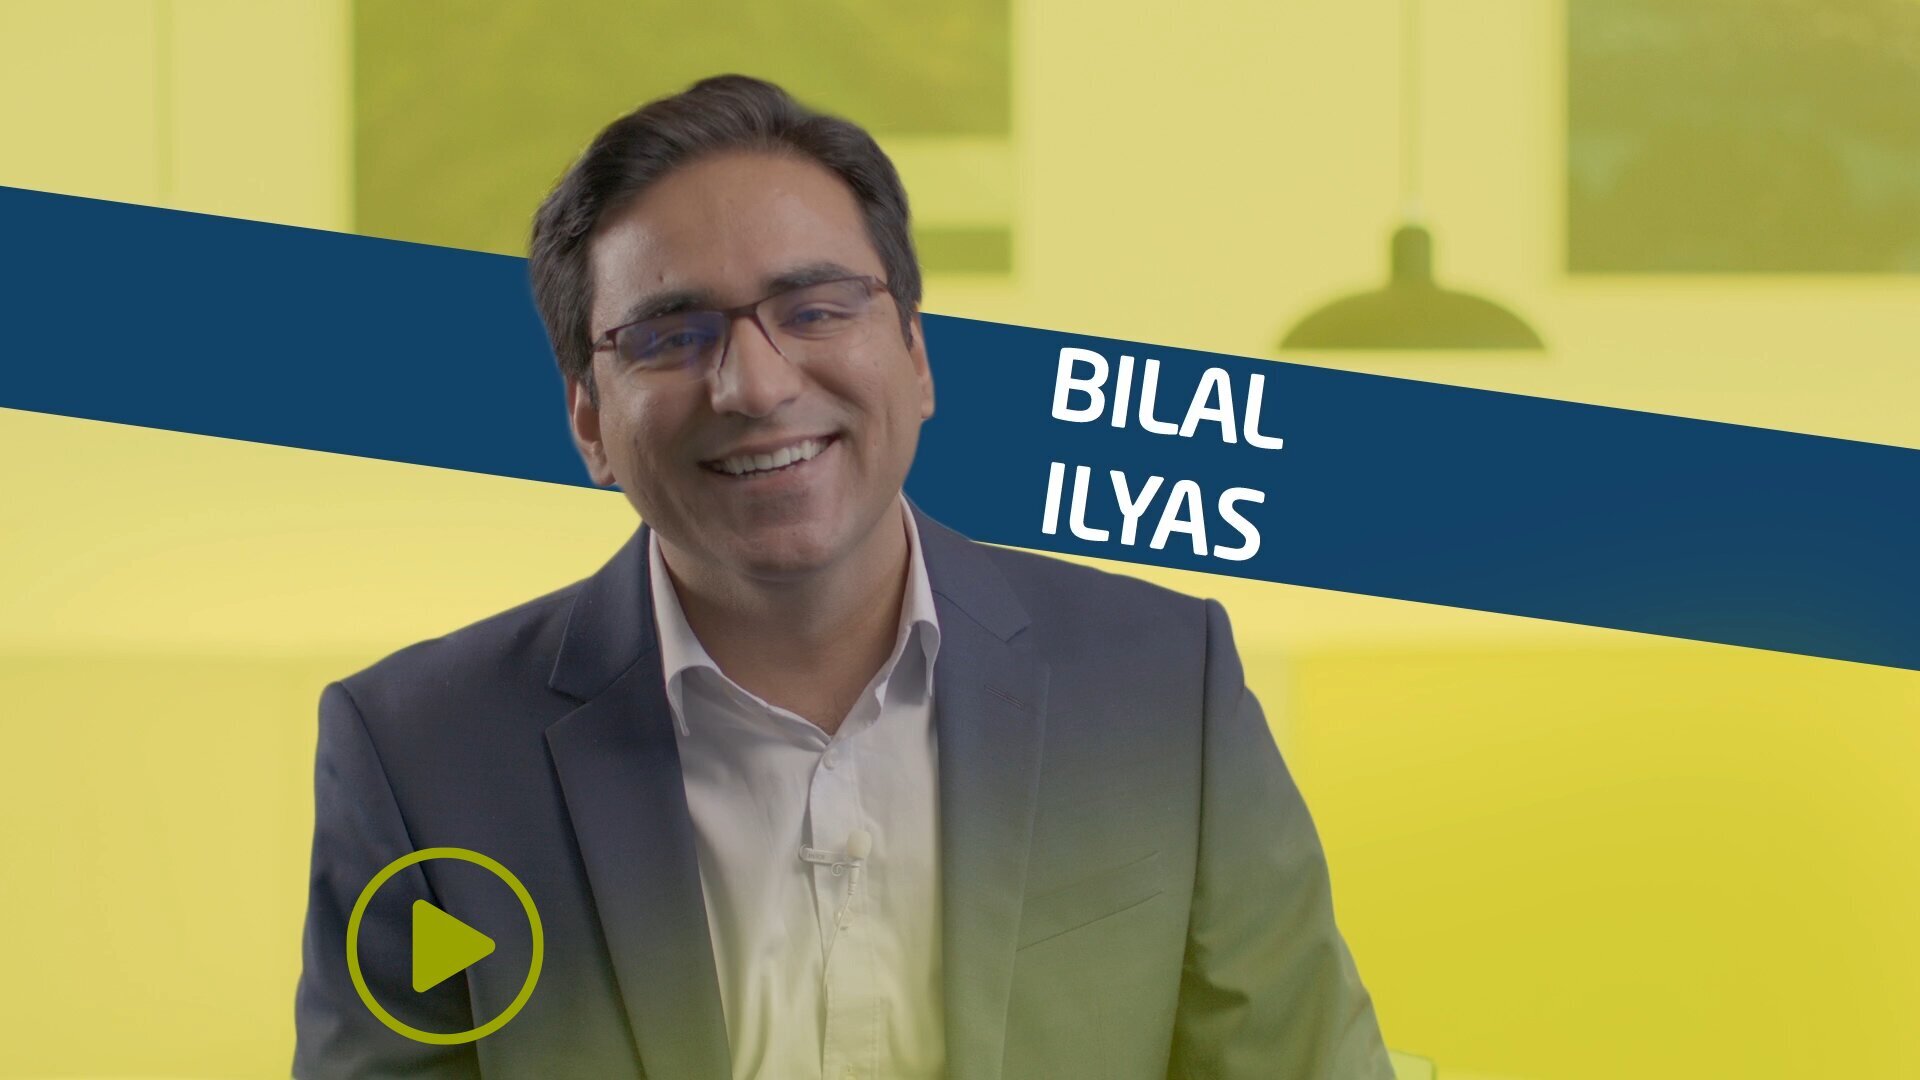  Bilal Ilyas, a Global Graduate Trainee Program graduate talks about his experience in a video